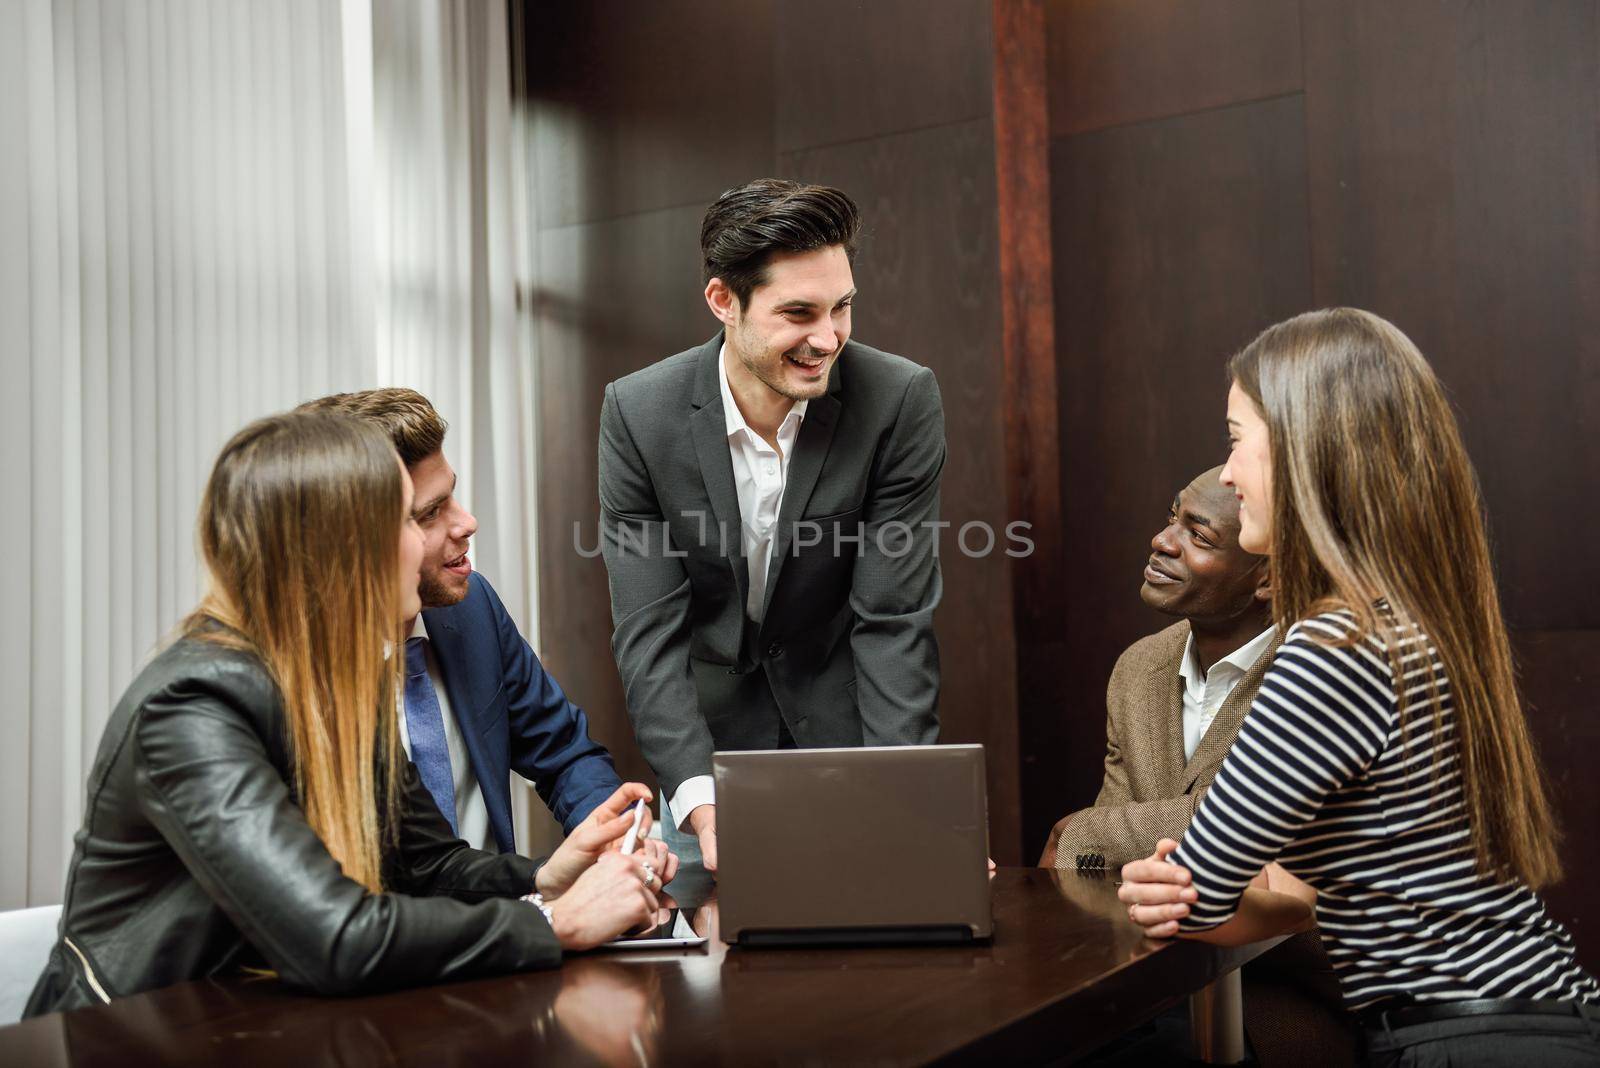 Businesspeople, teamwork. Group of multiethnic busy people working in an office. Male as leader wearing blazer jacket.